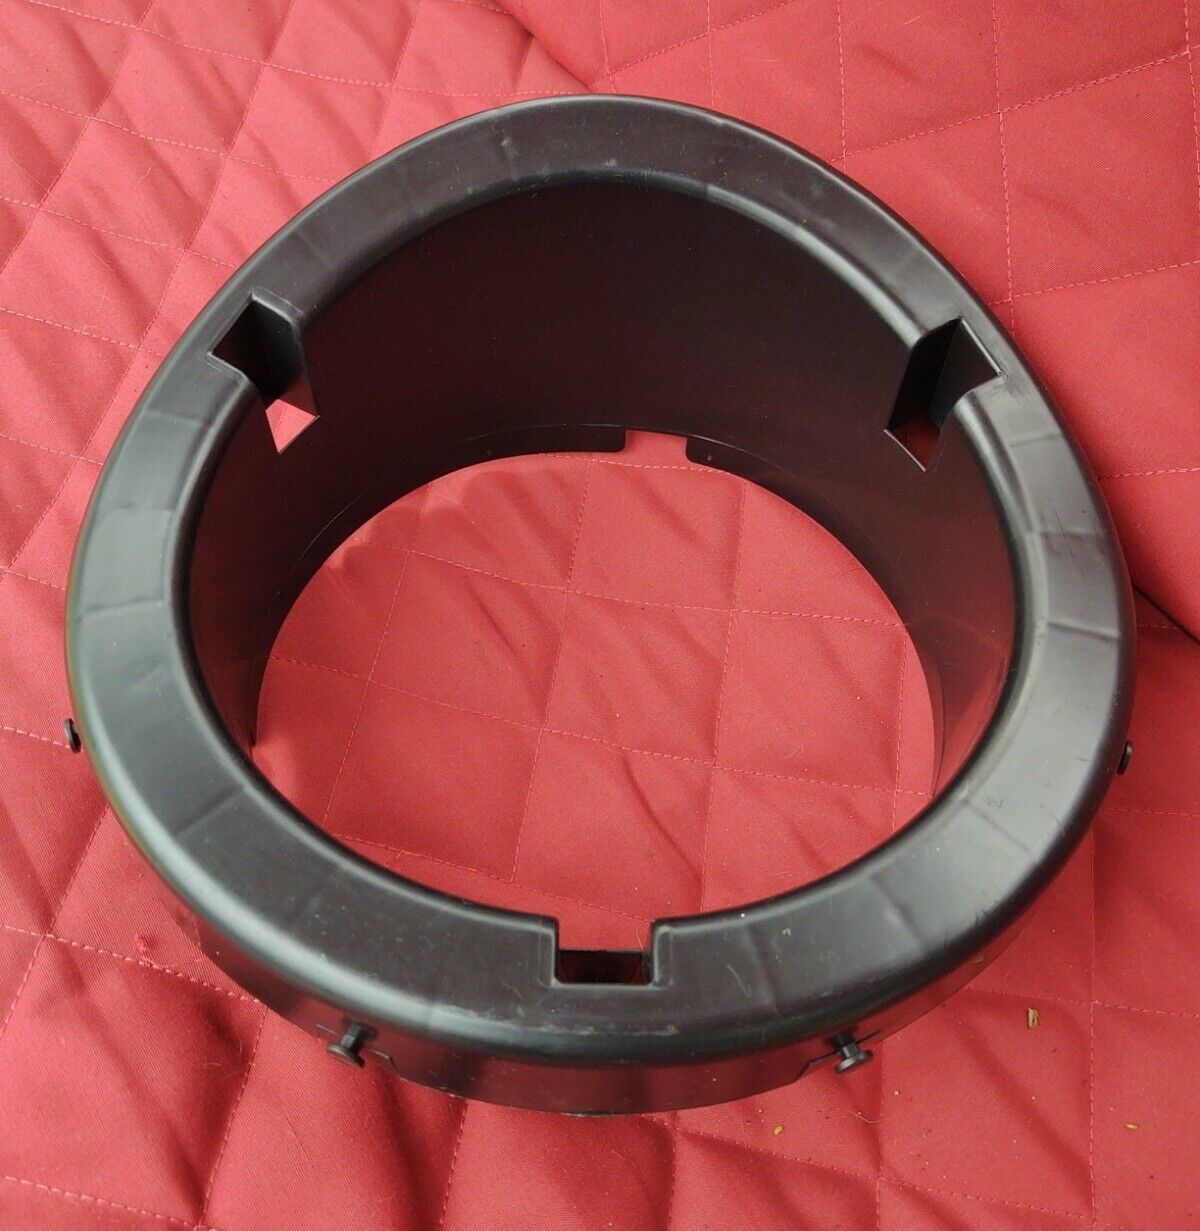 Evenflo Exersaucer Black Seat Ring W/ Wheels Replacement Part 61611415